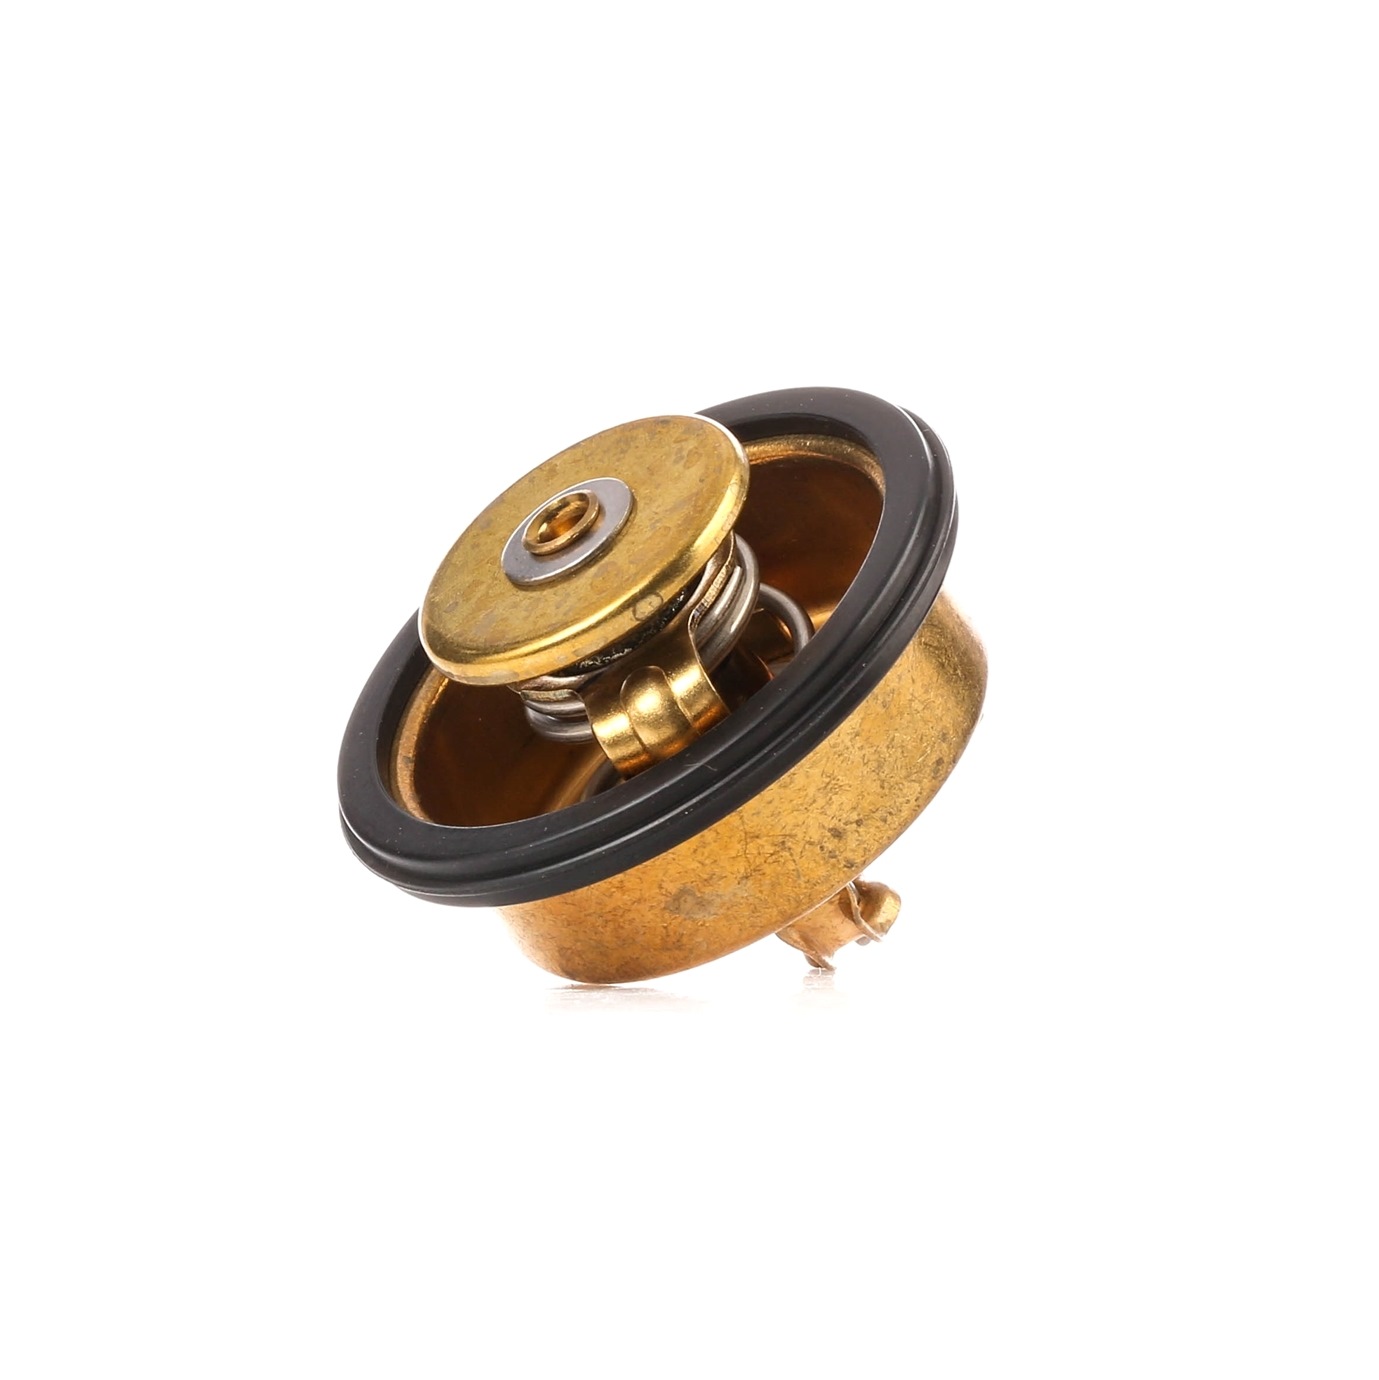 STARK SKTC-0560140 Engine thermostat Opening Temperature: 87°C, with seal